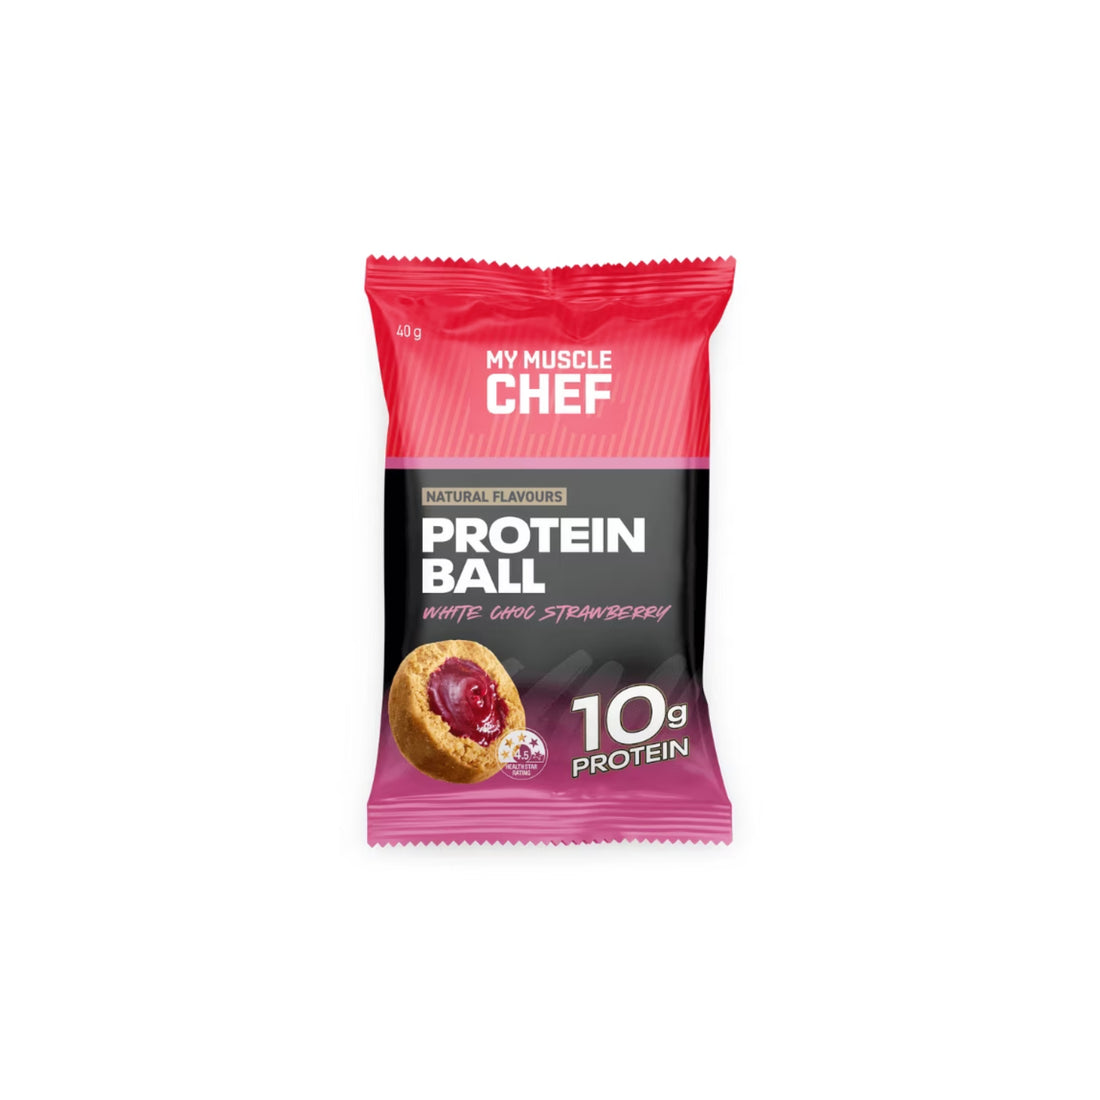 My Muscle Chef Protein Ball 40g